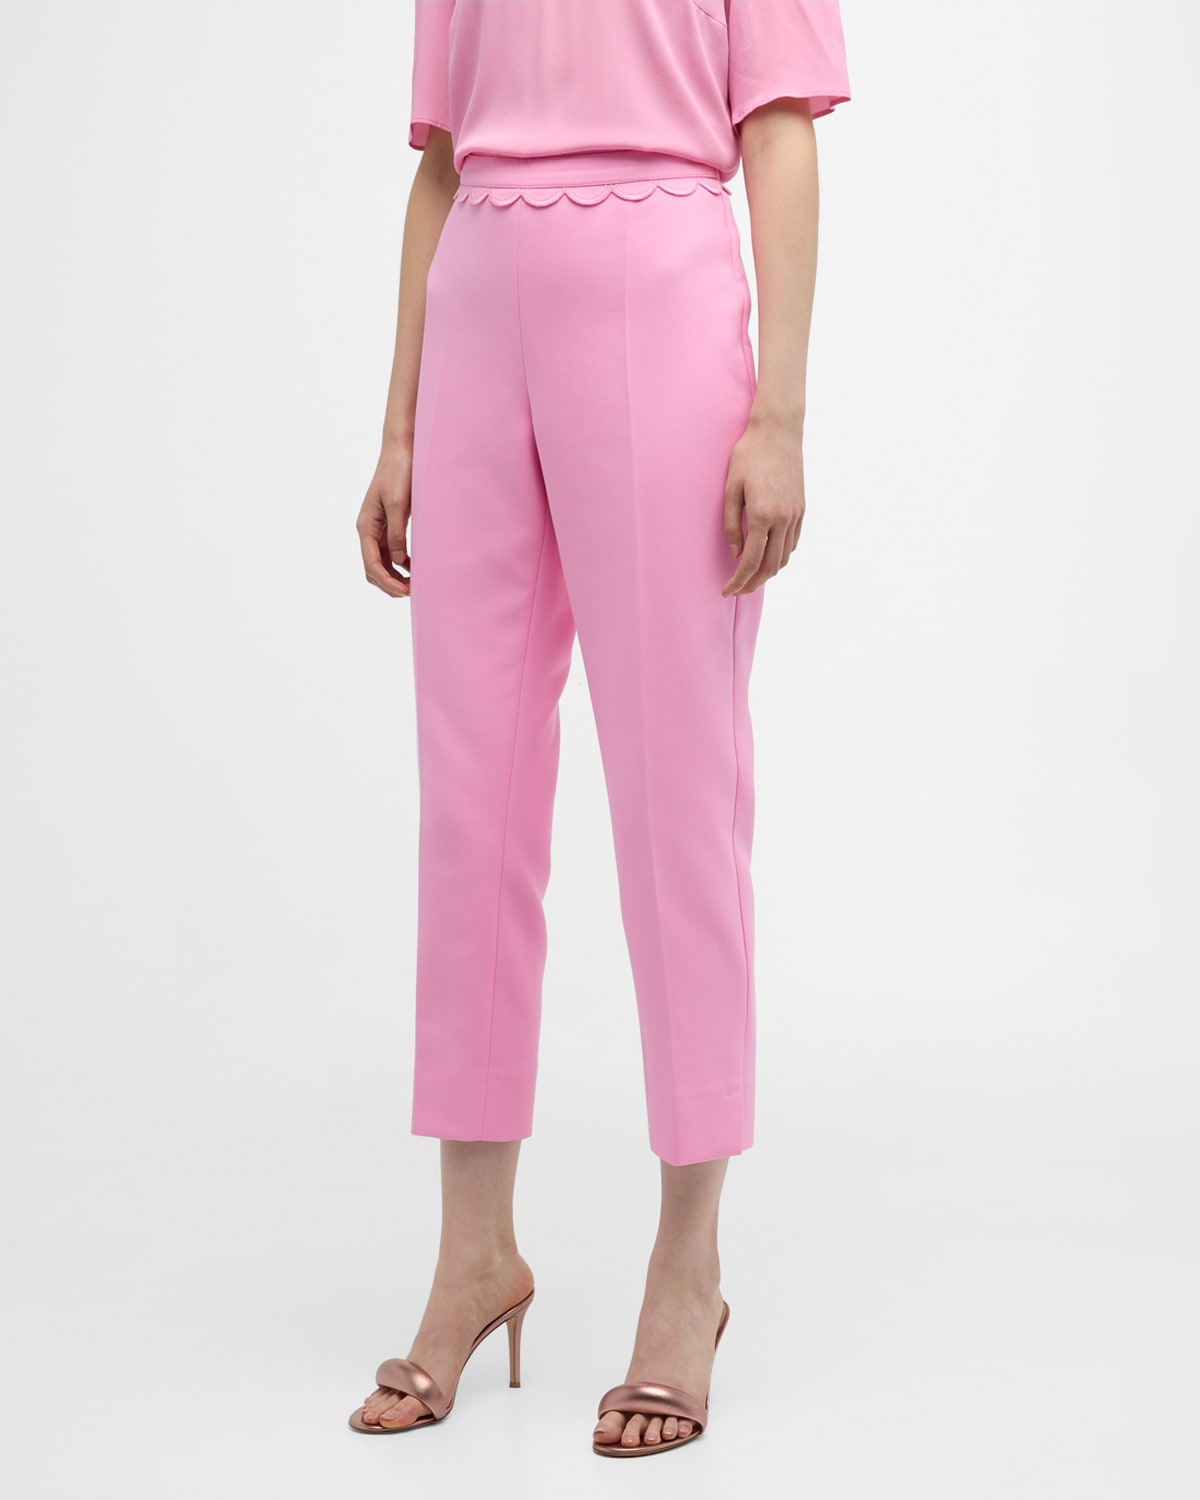 Maison Common High-rise Scalloped Waist Detail Slim-leg Ankle Cotton Pants In Pink